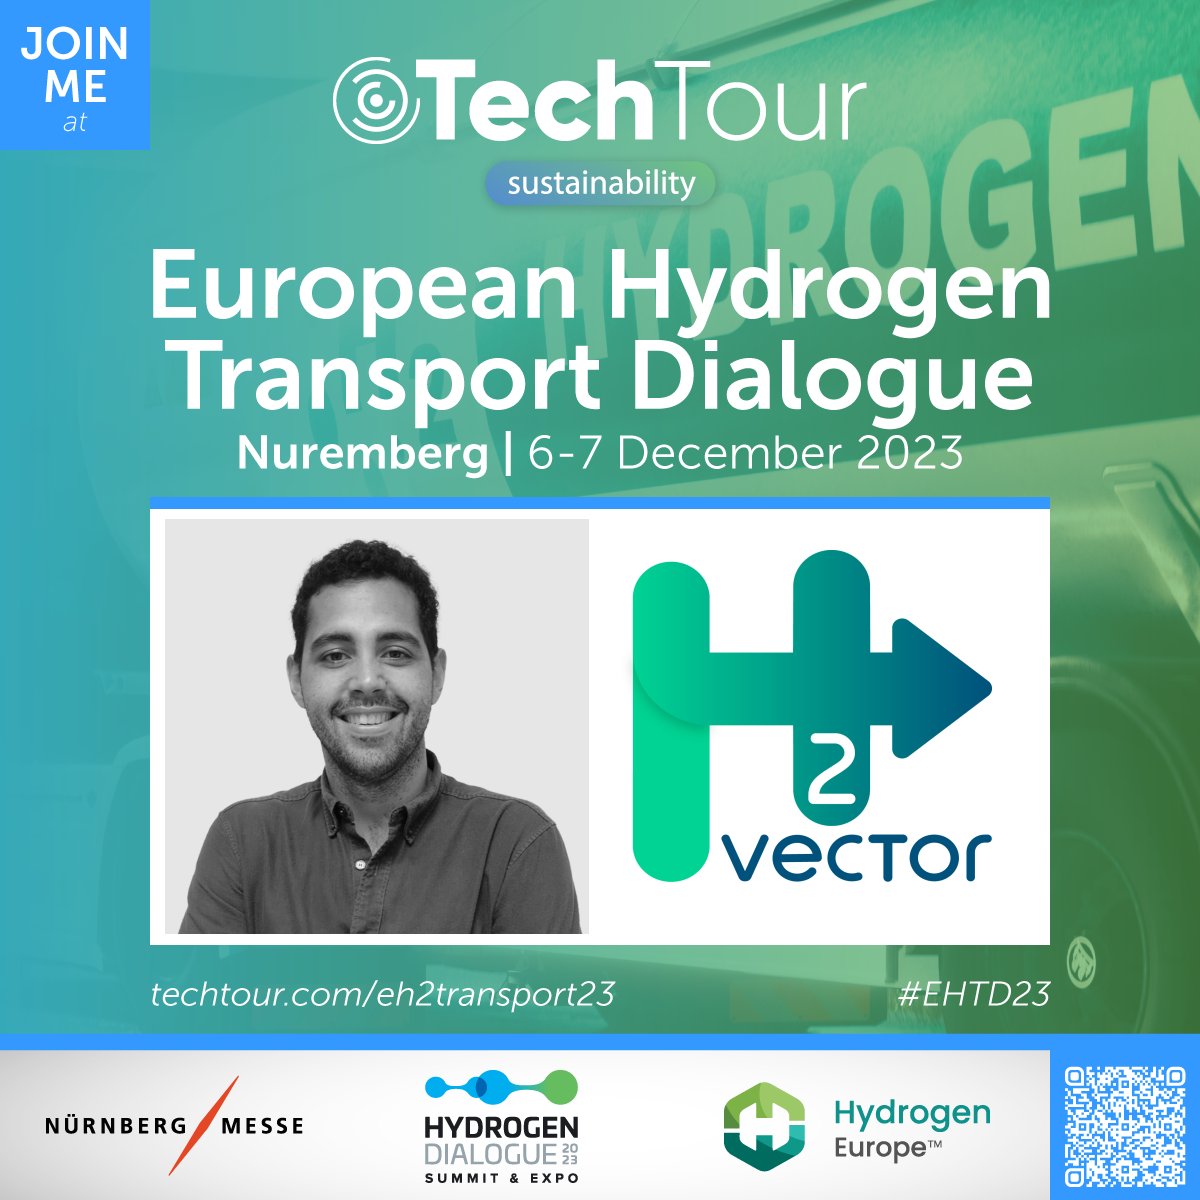 ✈️@H2Vector is heading to the 2nd edition of the European Hydrogen Transport Dialogue, organized by @TechTourHQ that will take place on 6-7 December in Nuremberg (Germany). ✅Without any doubt, a unique and enriching experience! Stay tuned! #EHTD #EHTD23 #GreenHydrogen